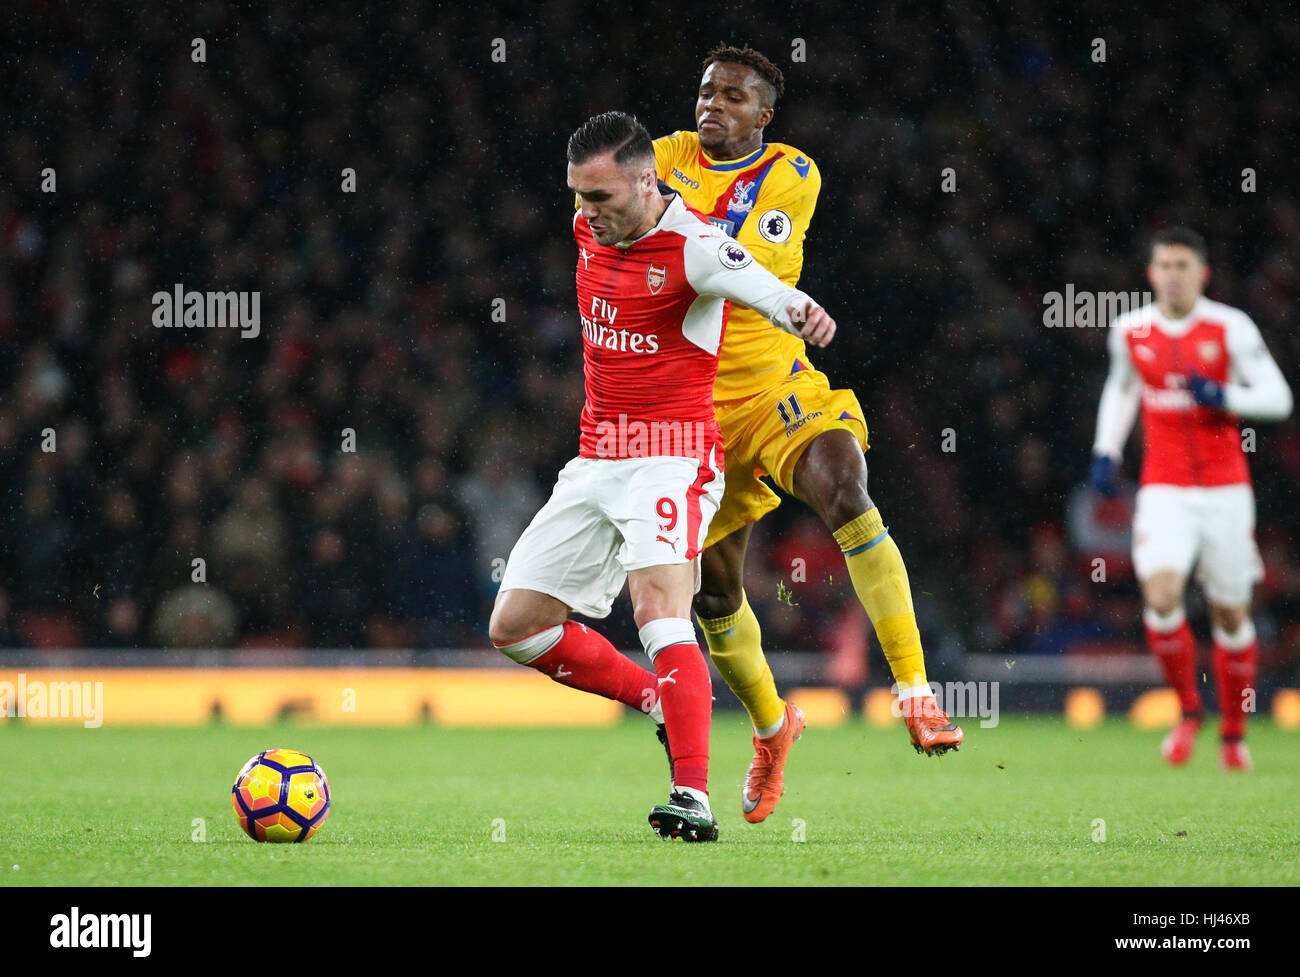 Lucas Perez of Arsenal on the ball during the Premier League match between Arsenal and Crystal Palace at the Emirates Stadium in London. Stock Photo